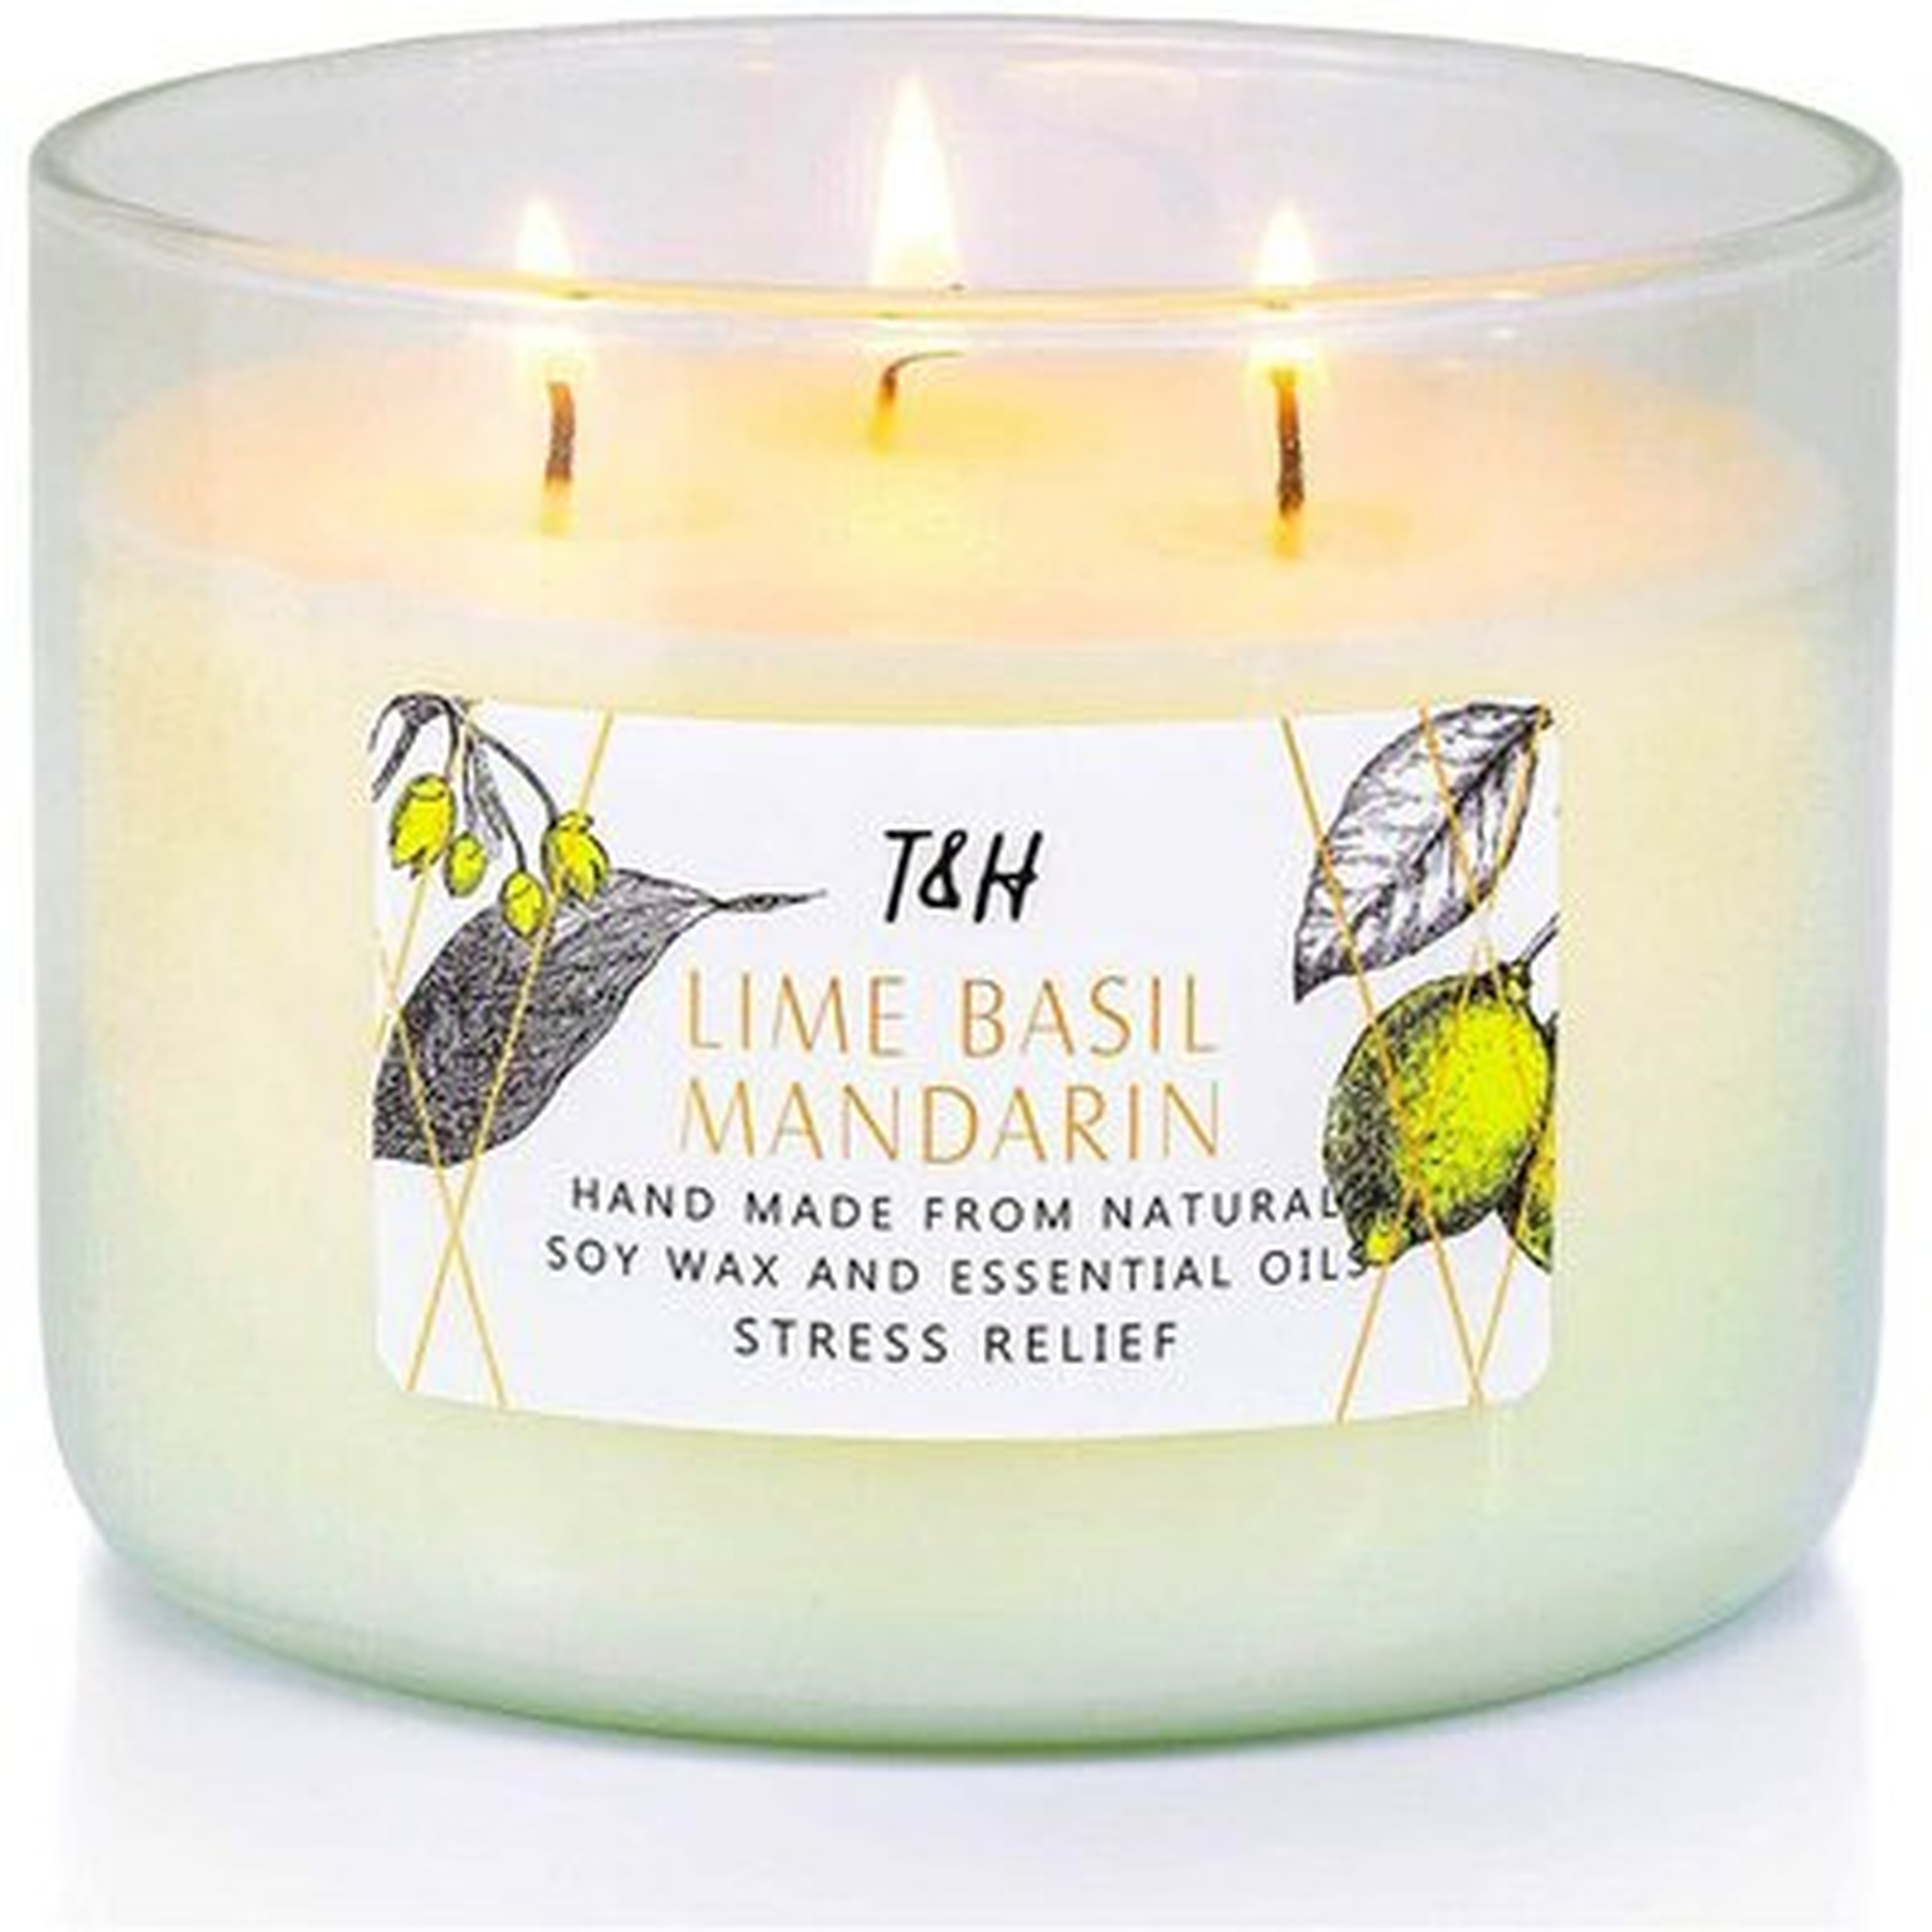 Lime Basil Mandarin Scented Candle 3 Wick Candles For Home - Wayfair